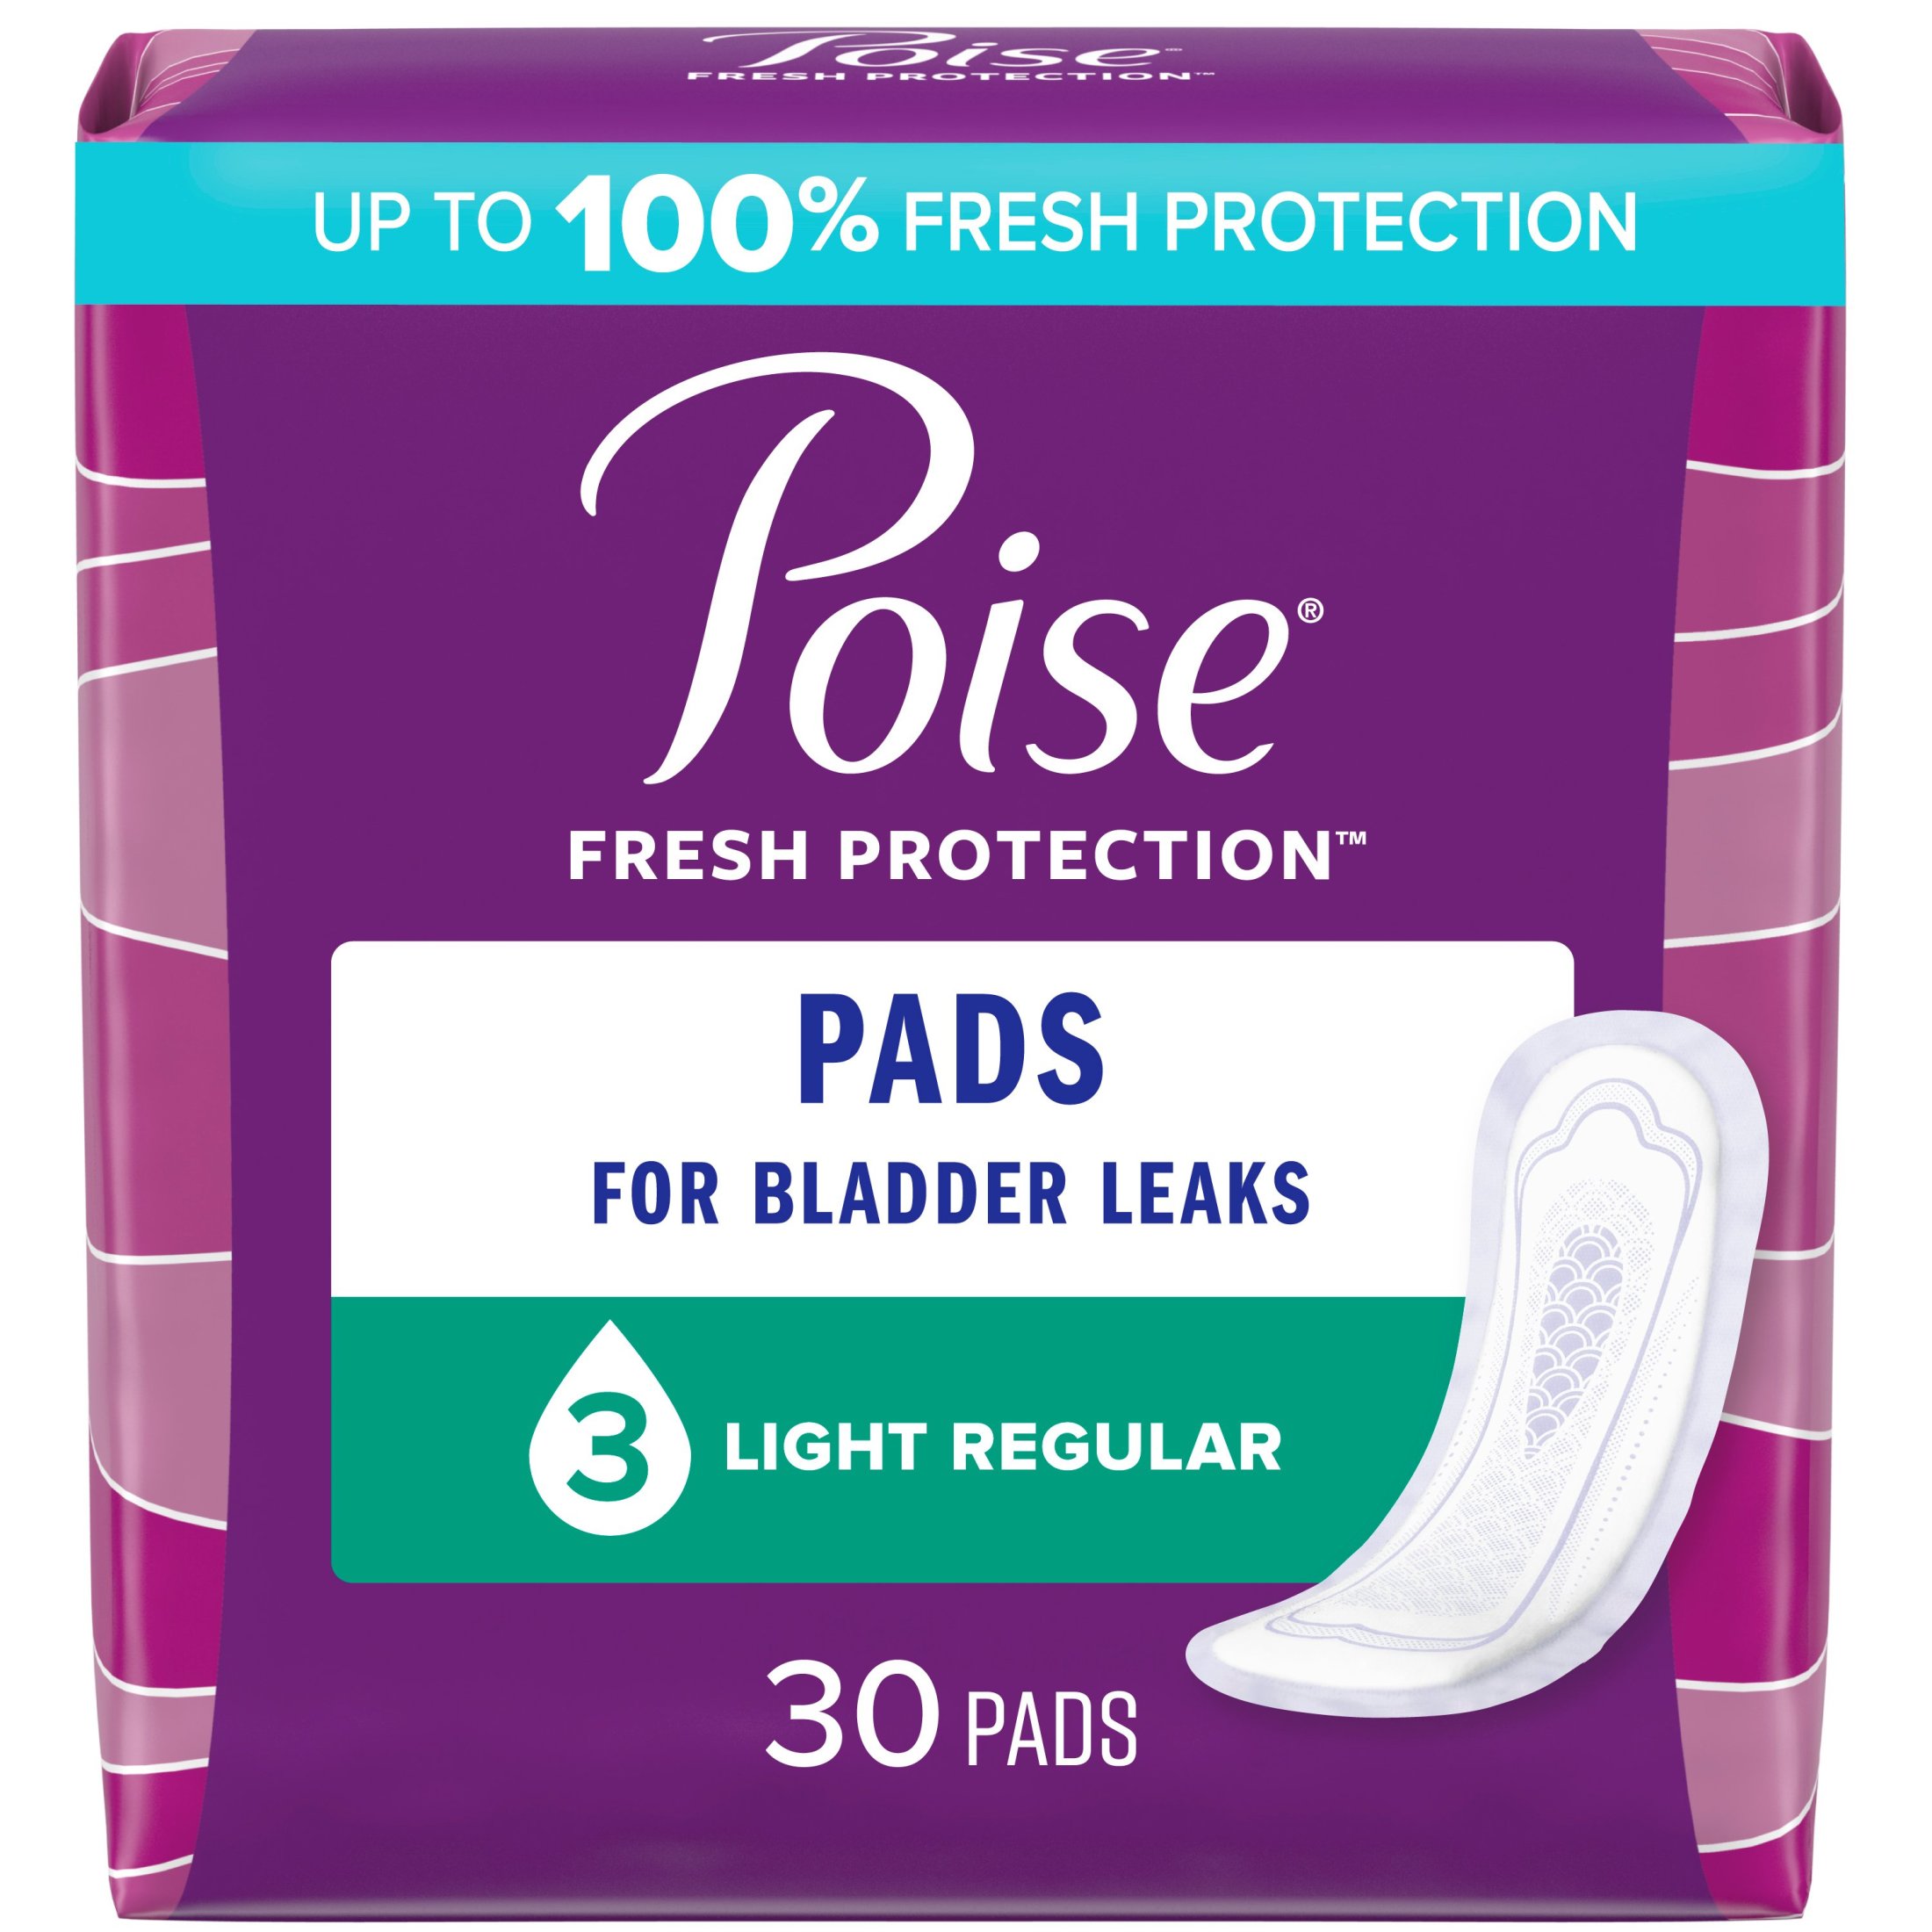 Poise Incontinence Pads for Women, 3 Drop, Light Absorbency, Regular, 30 Count - image 1 of 8